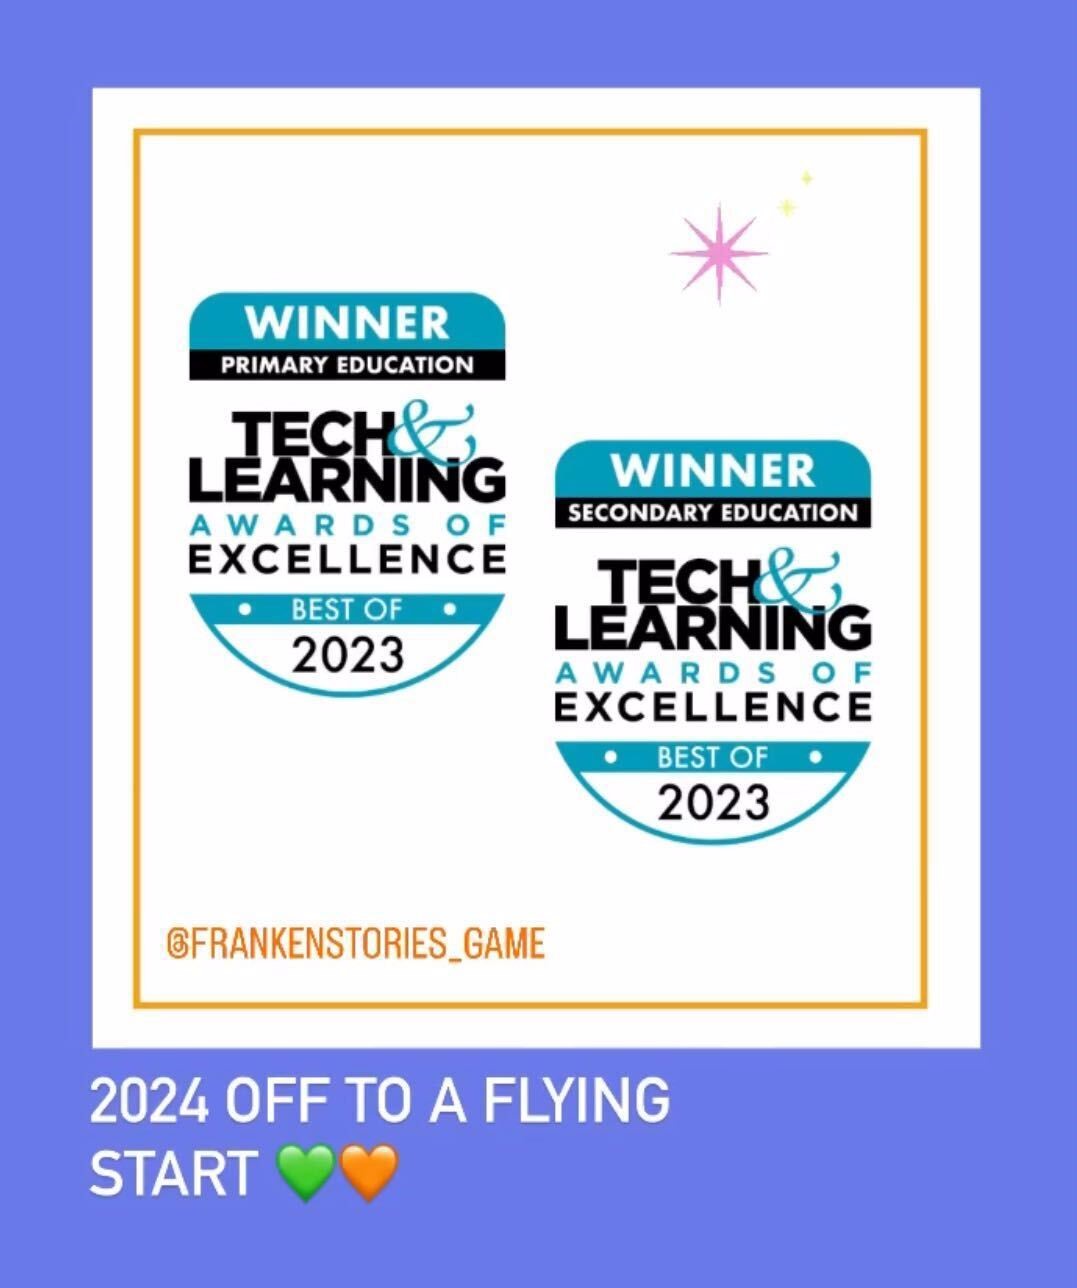 Winner badges for the Tech & Learning Awards of Excellence Best of 2023 primary and secondary education categories.